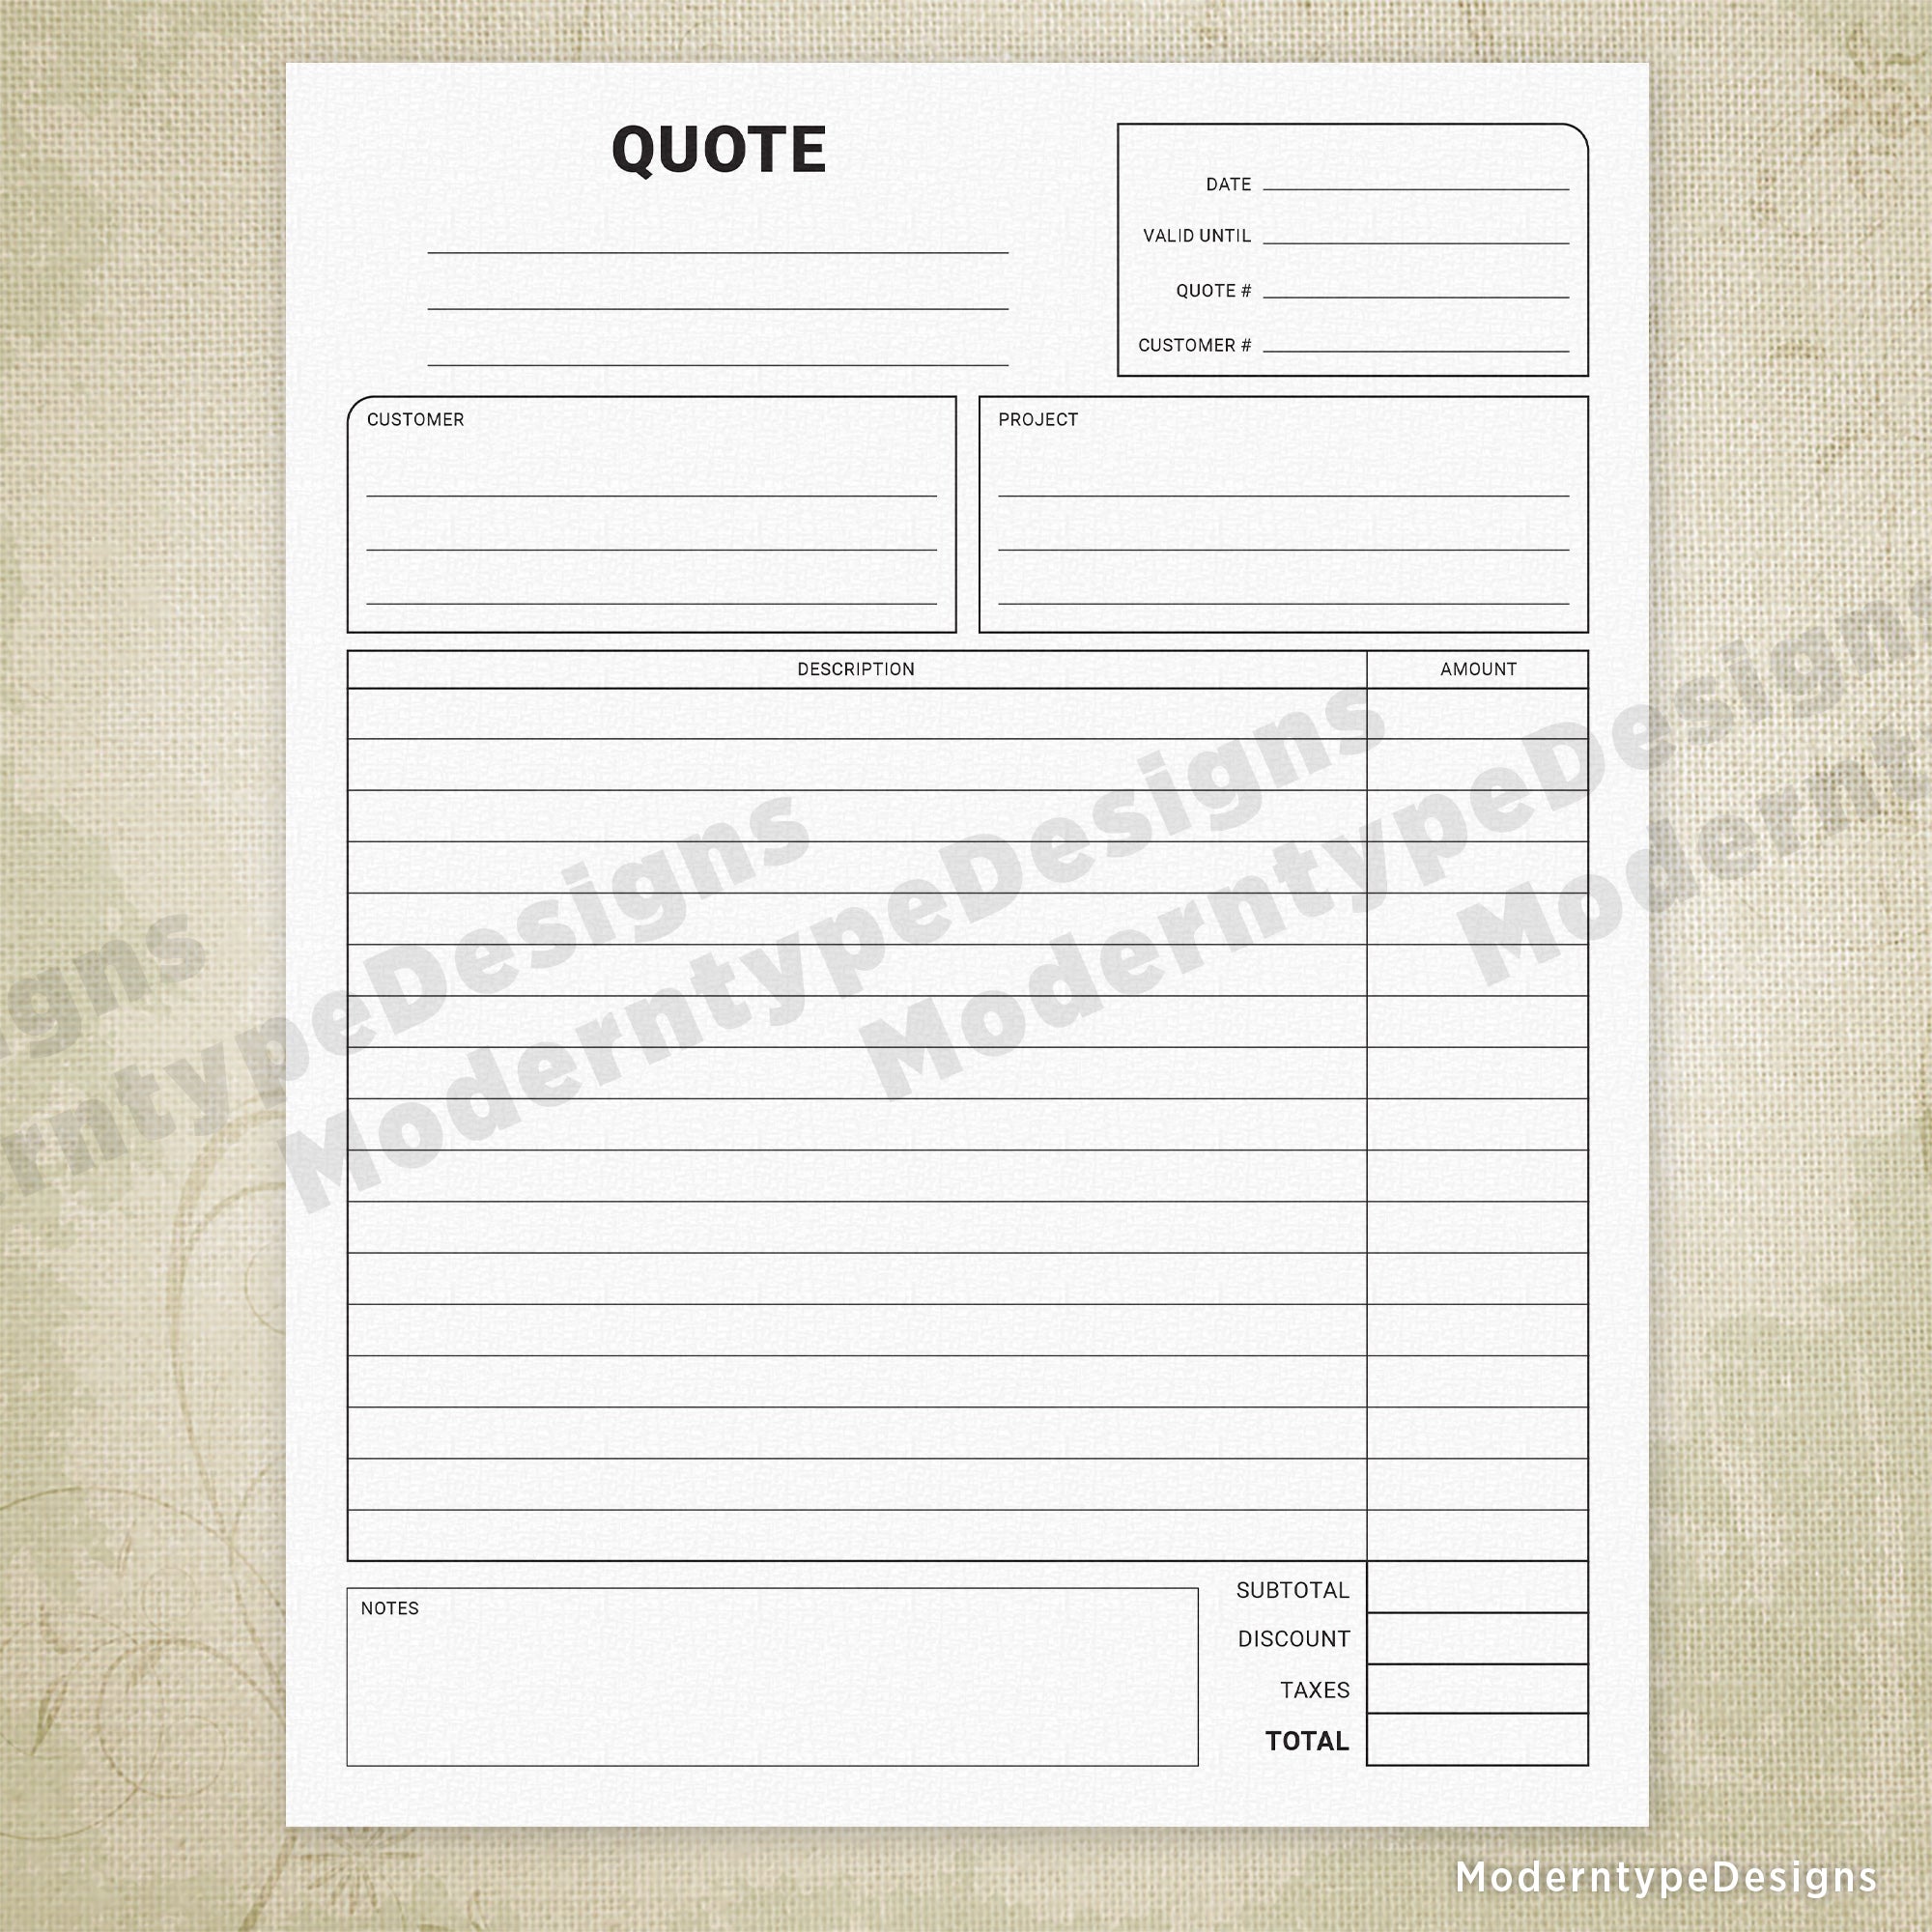 Price Quote Printable Form with Lines, #3